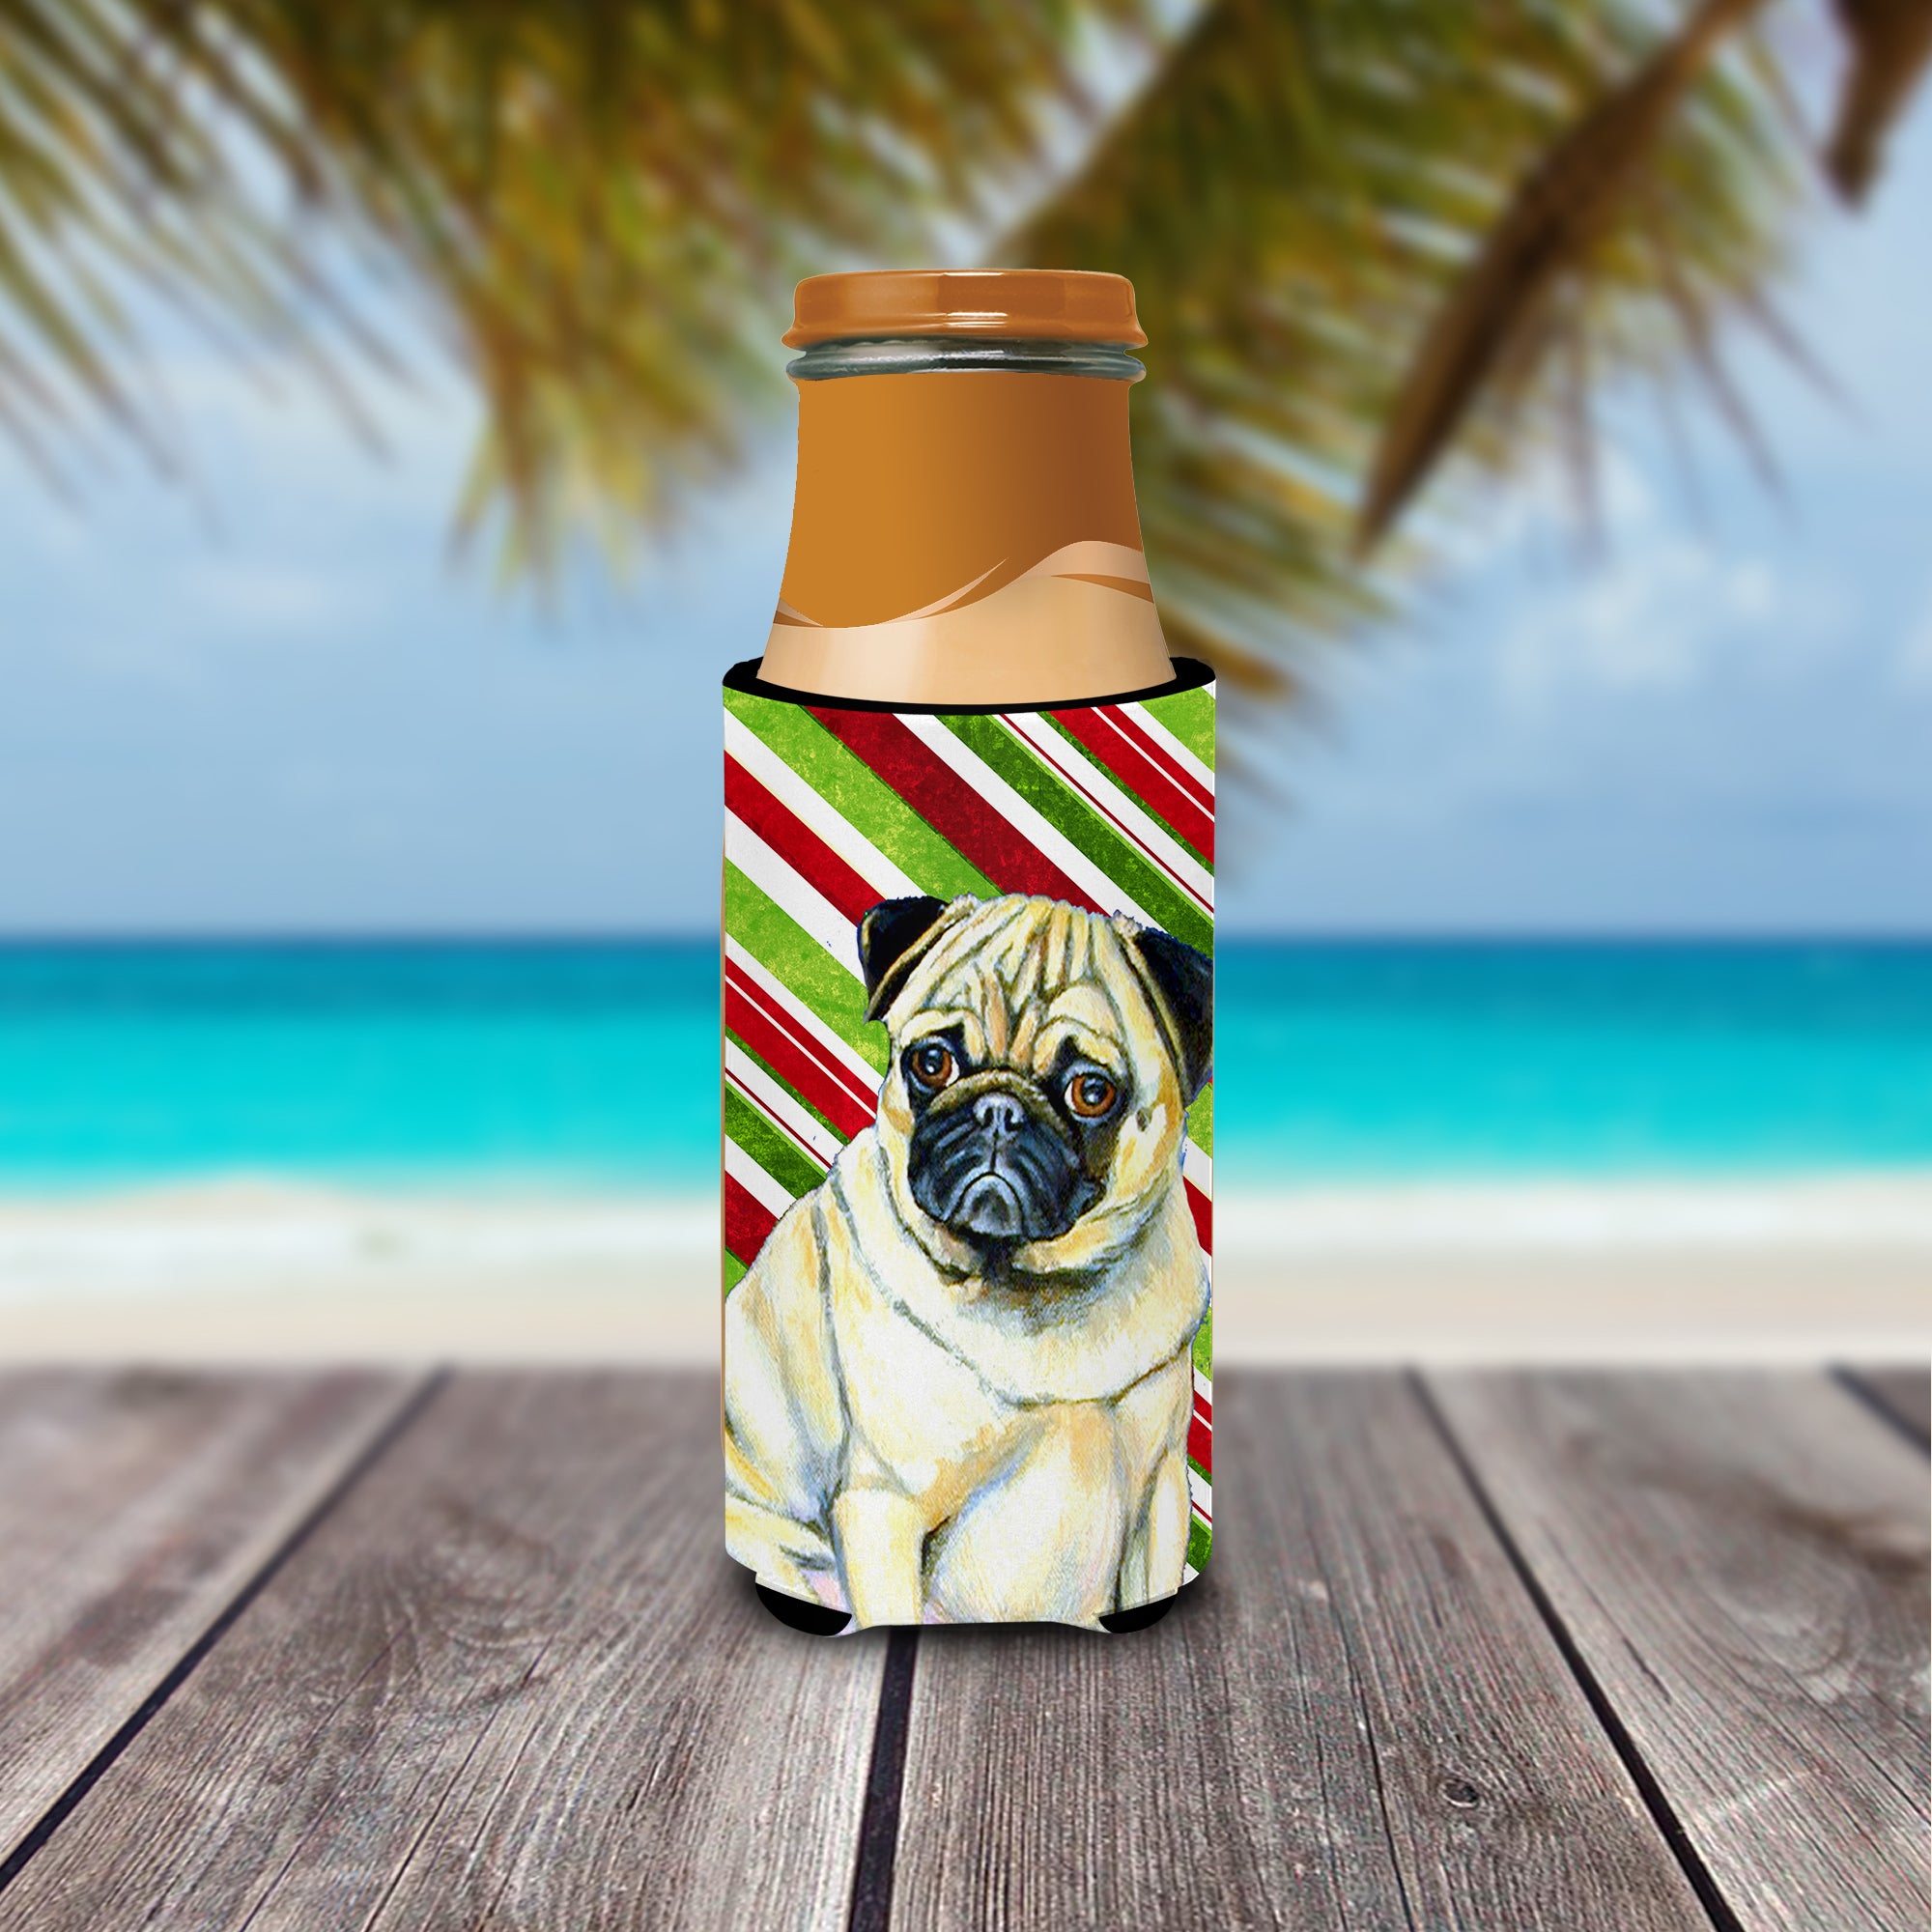 Pug Candy Cane Holiday Christmas Ultra Beverage Insulators for slim cans LH9252MUK.